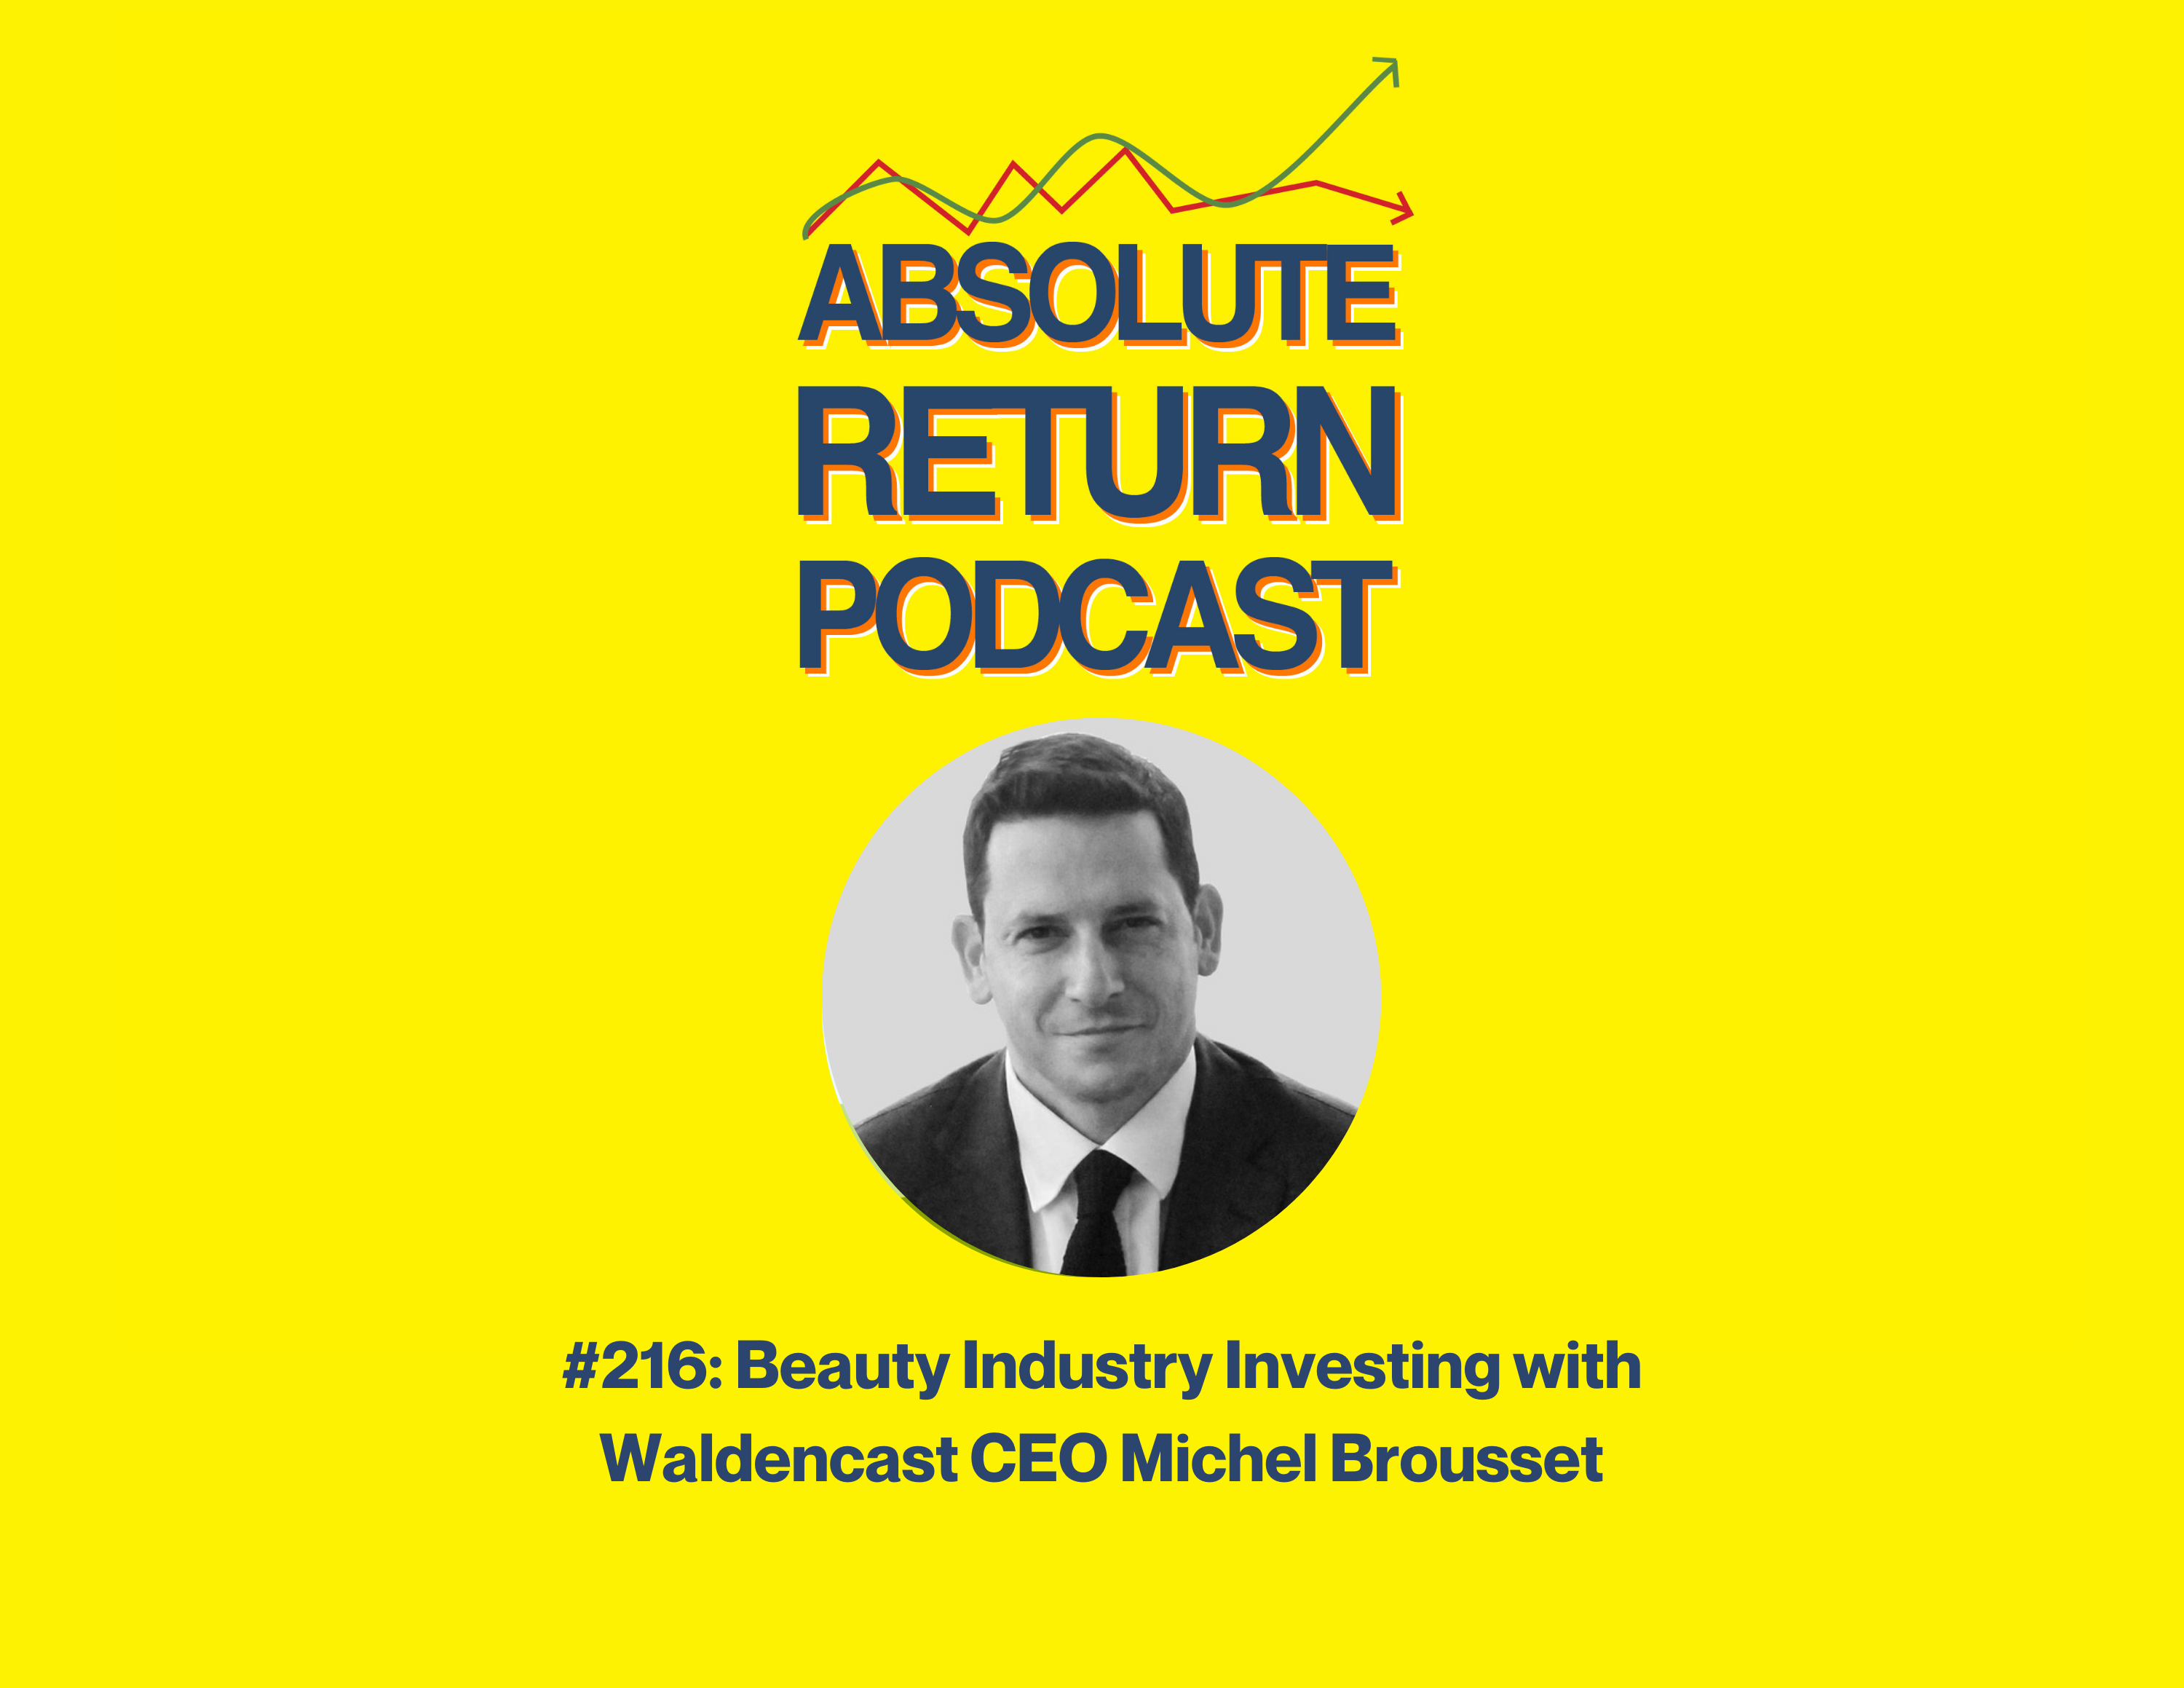 Absolute Return Podcast #216: Beauty Industry Investing with Waldencast CEO Michel Brousset